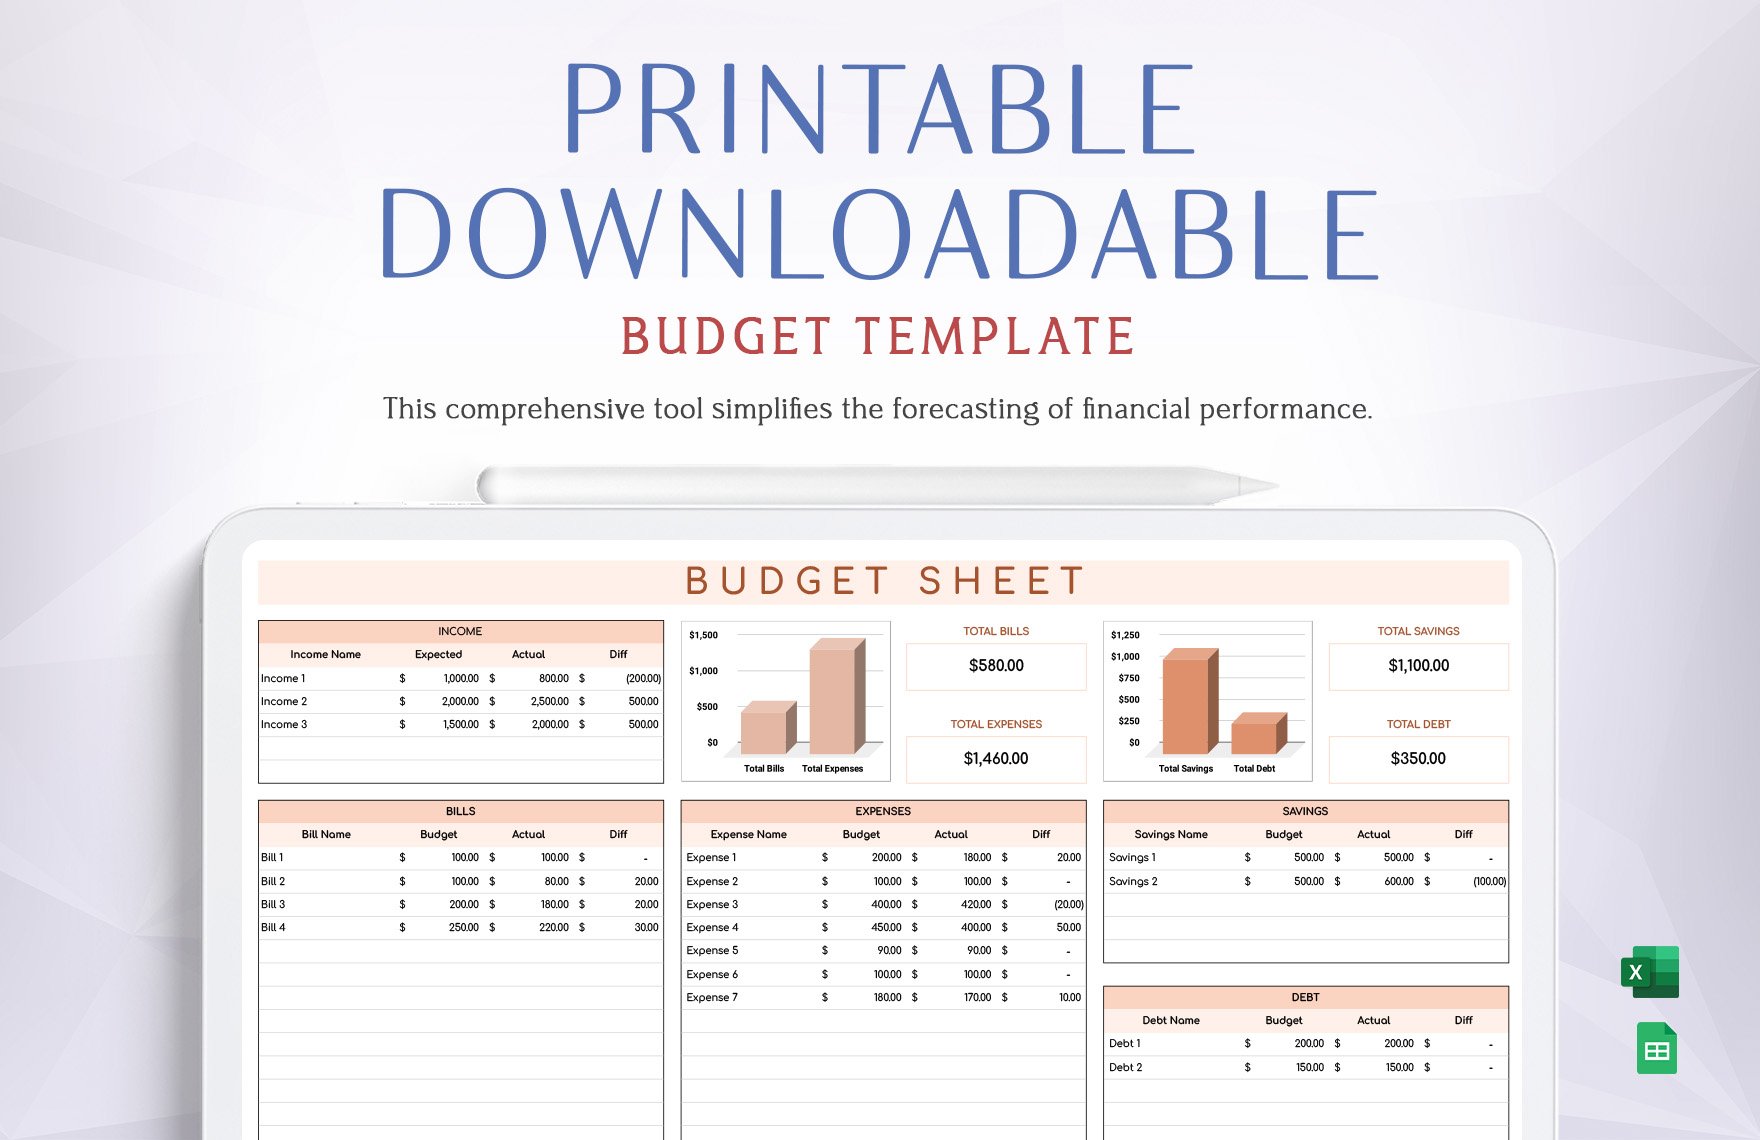 Free Printable, Downloadable Budget Template